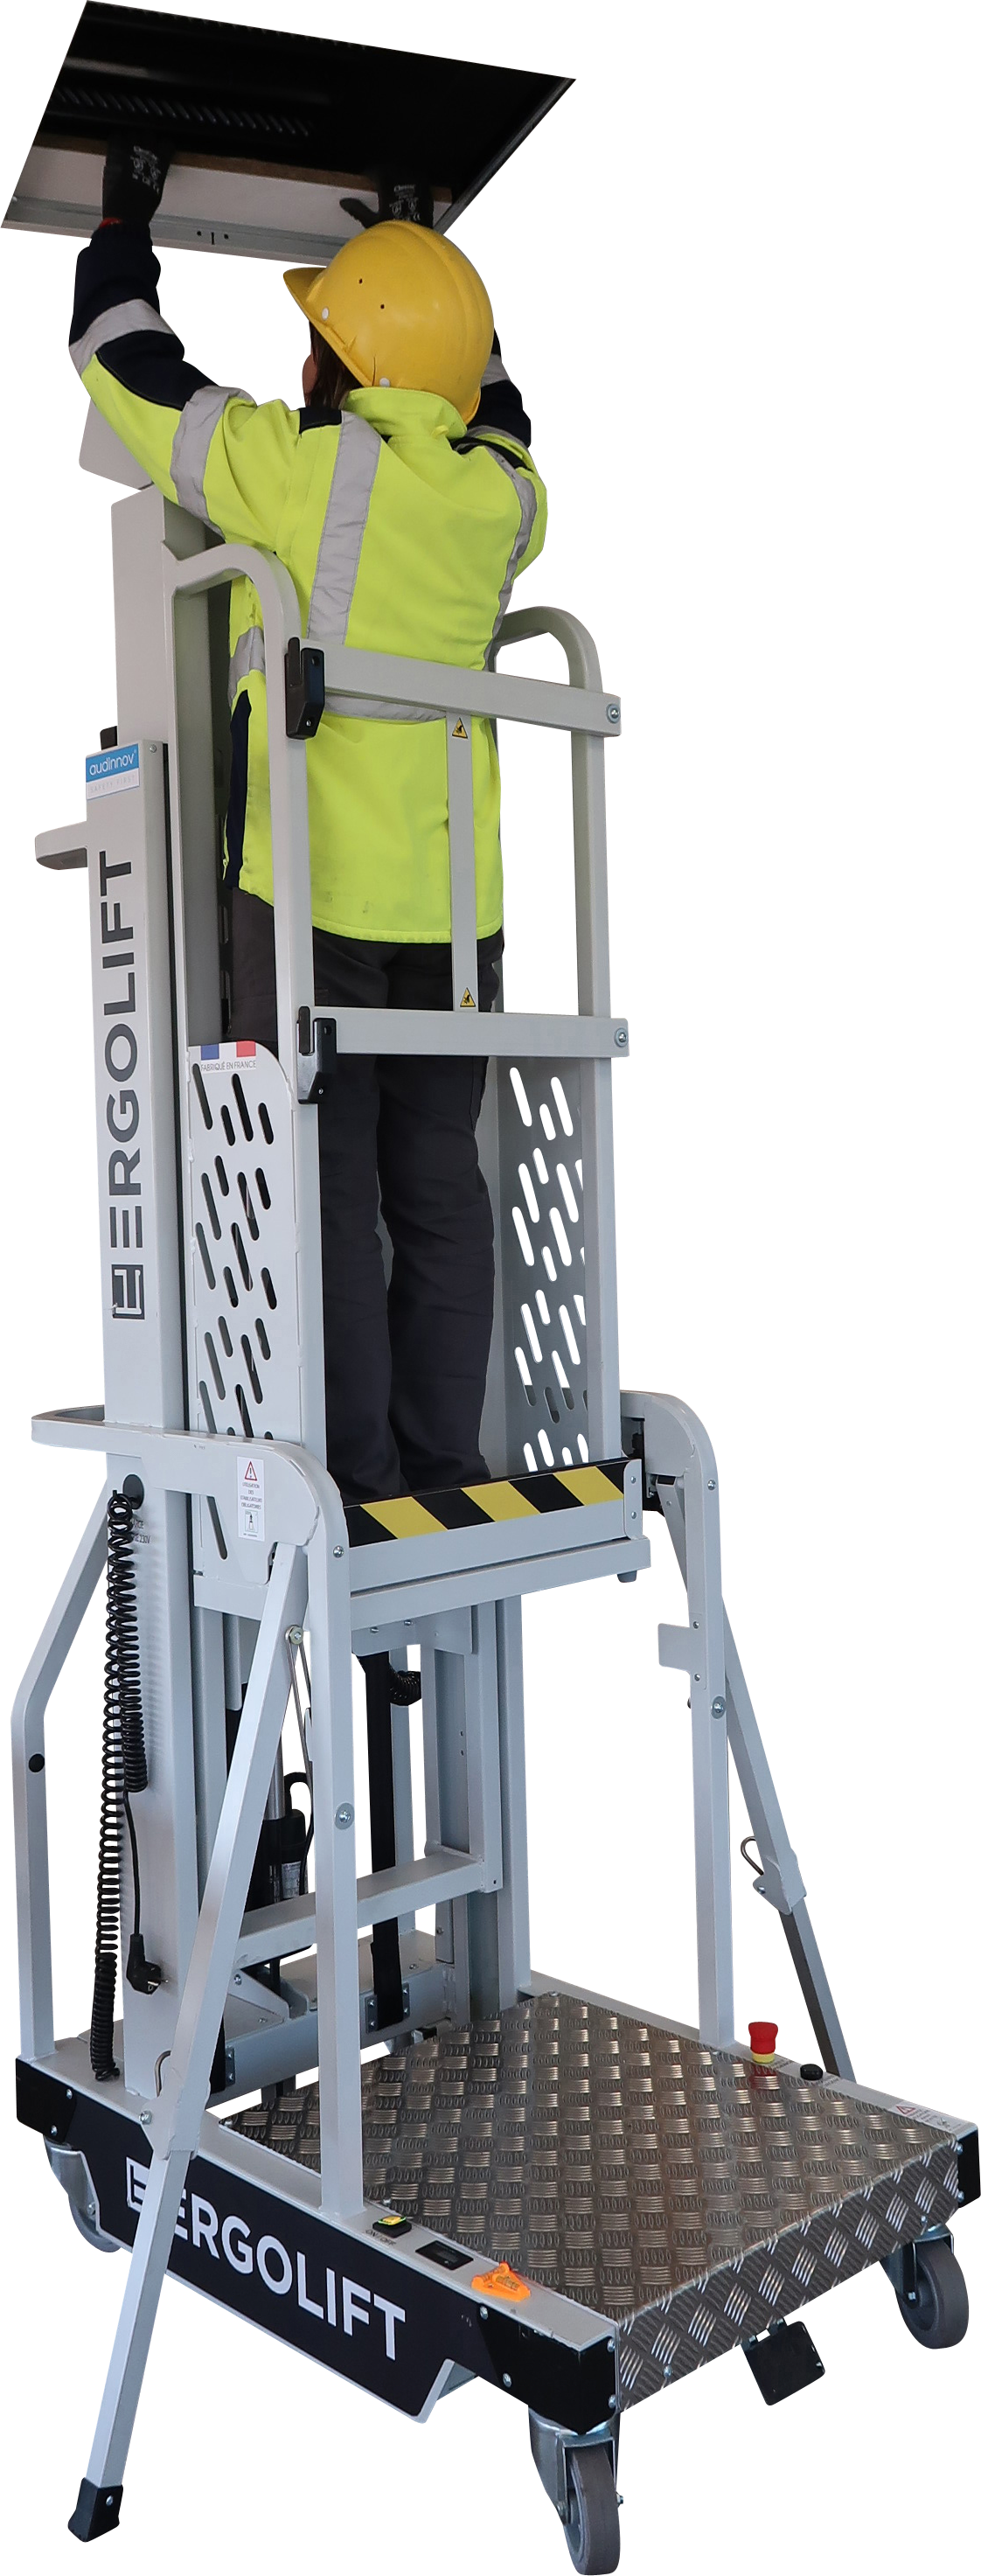 Ergolift® 60x60 : Electric lifting workstation with reduced dimensions